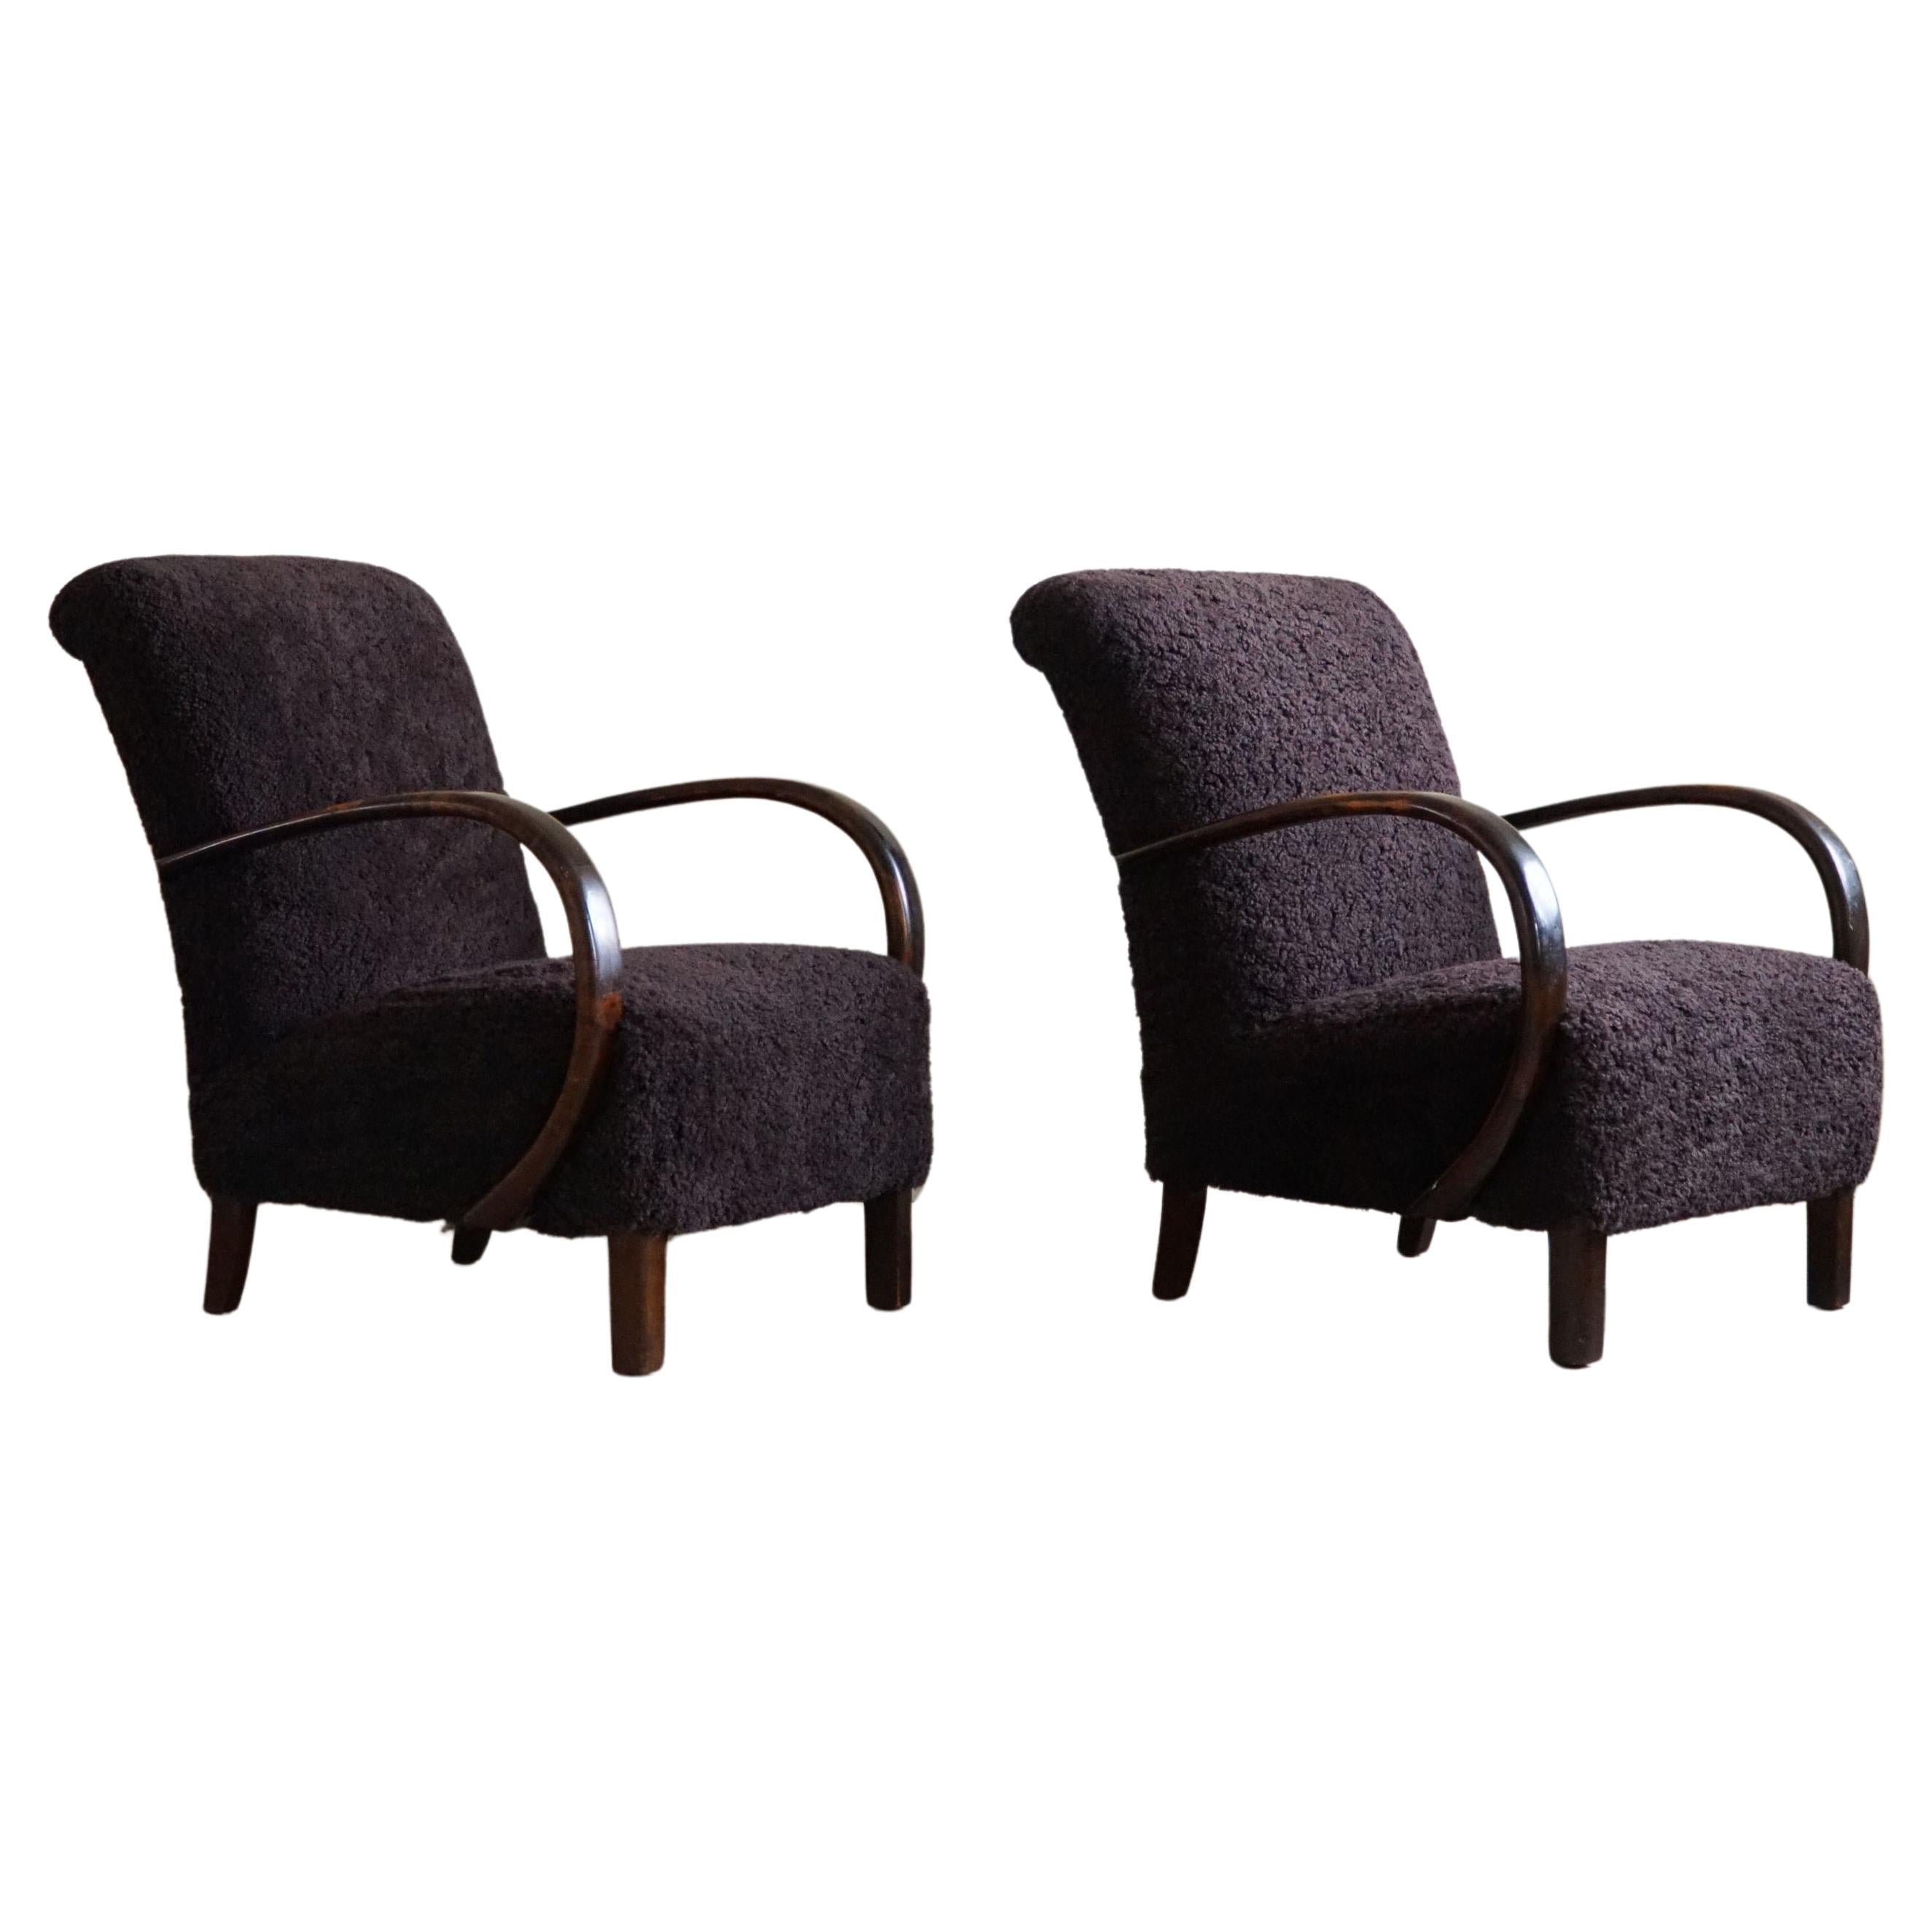 A Pair of Danish Mid Century Modern Lounge Chairs in Beech & Lambswool, 1940s For Sale